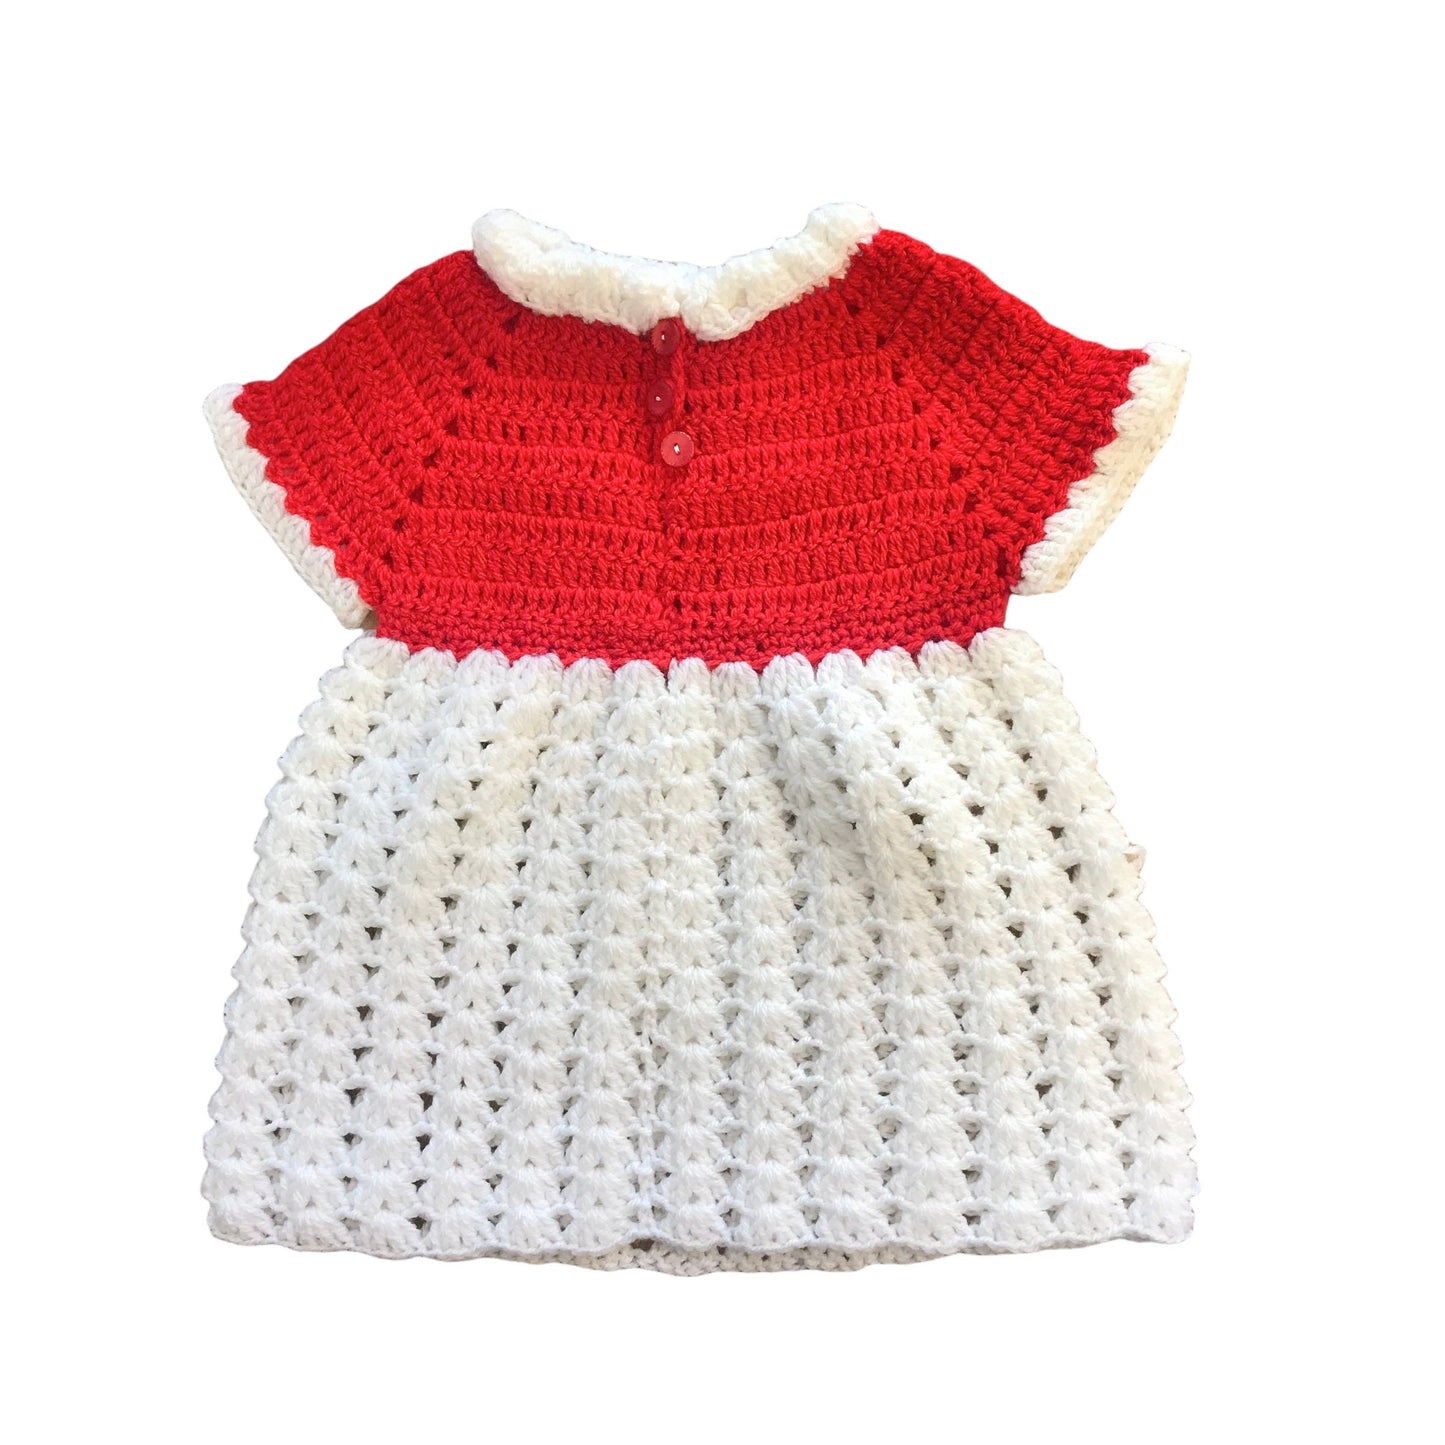 Vintage 1960's Red / White Knitted Dress   2-3Y